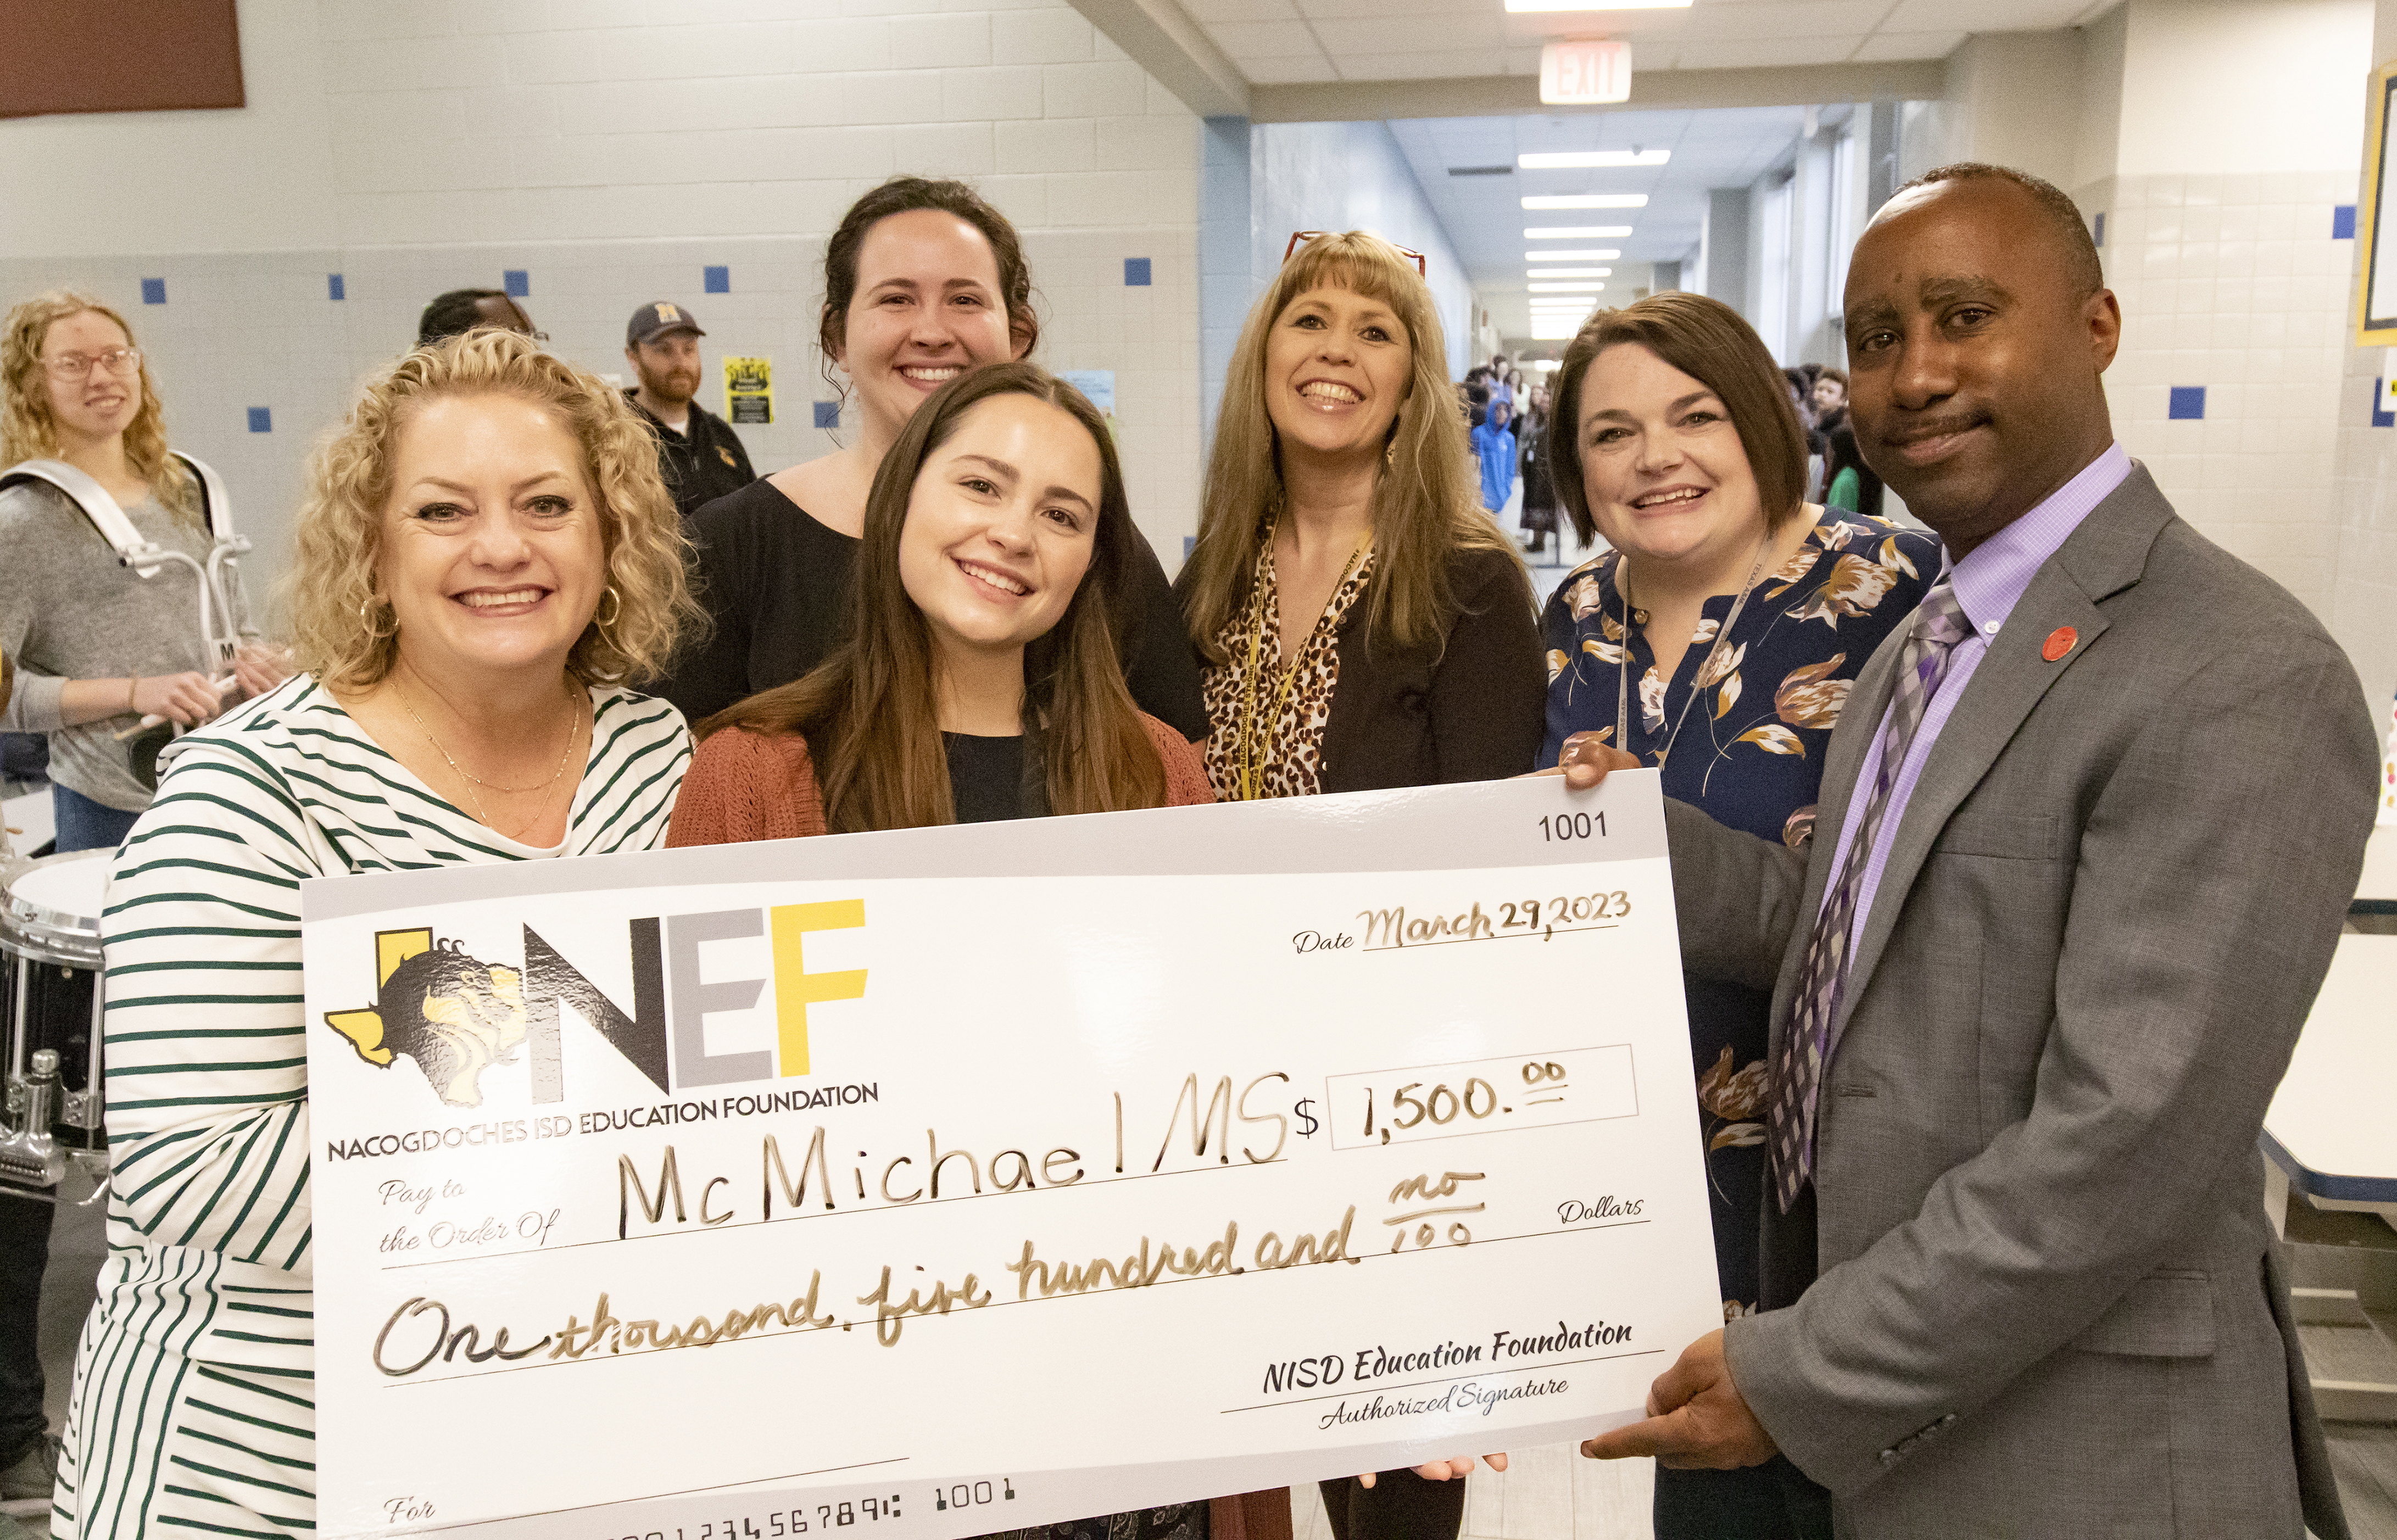 McMichael Middle School teachers (from left) Annemarie Story, Suzanna Sanchez, Emily McKenzie, Crystal Kilmer and Reagan Fitch Reyna shown with Nacogdoches ISD Education Foundation president Terrance Reeves.